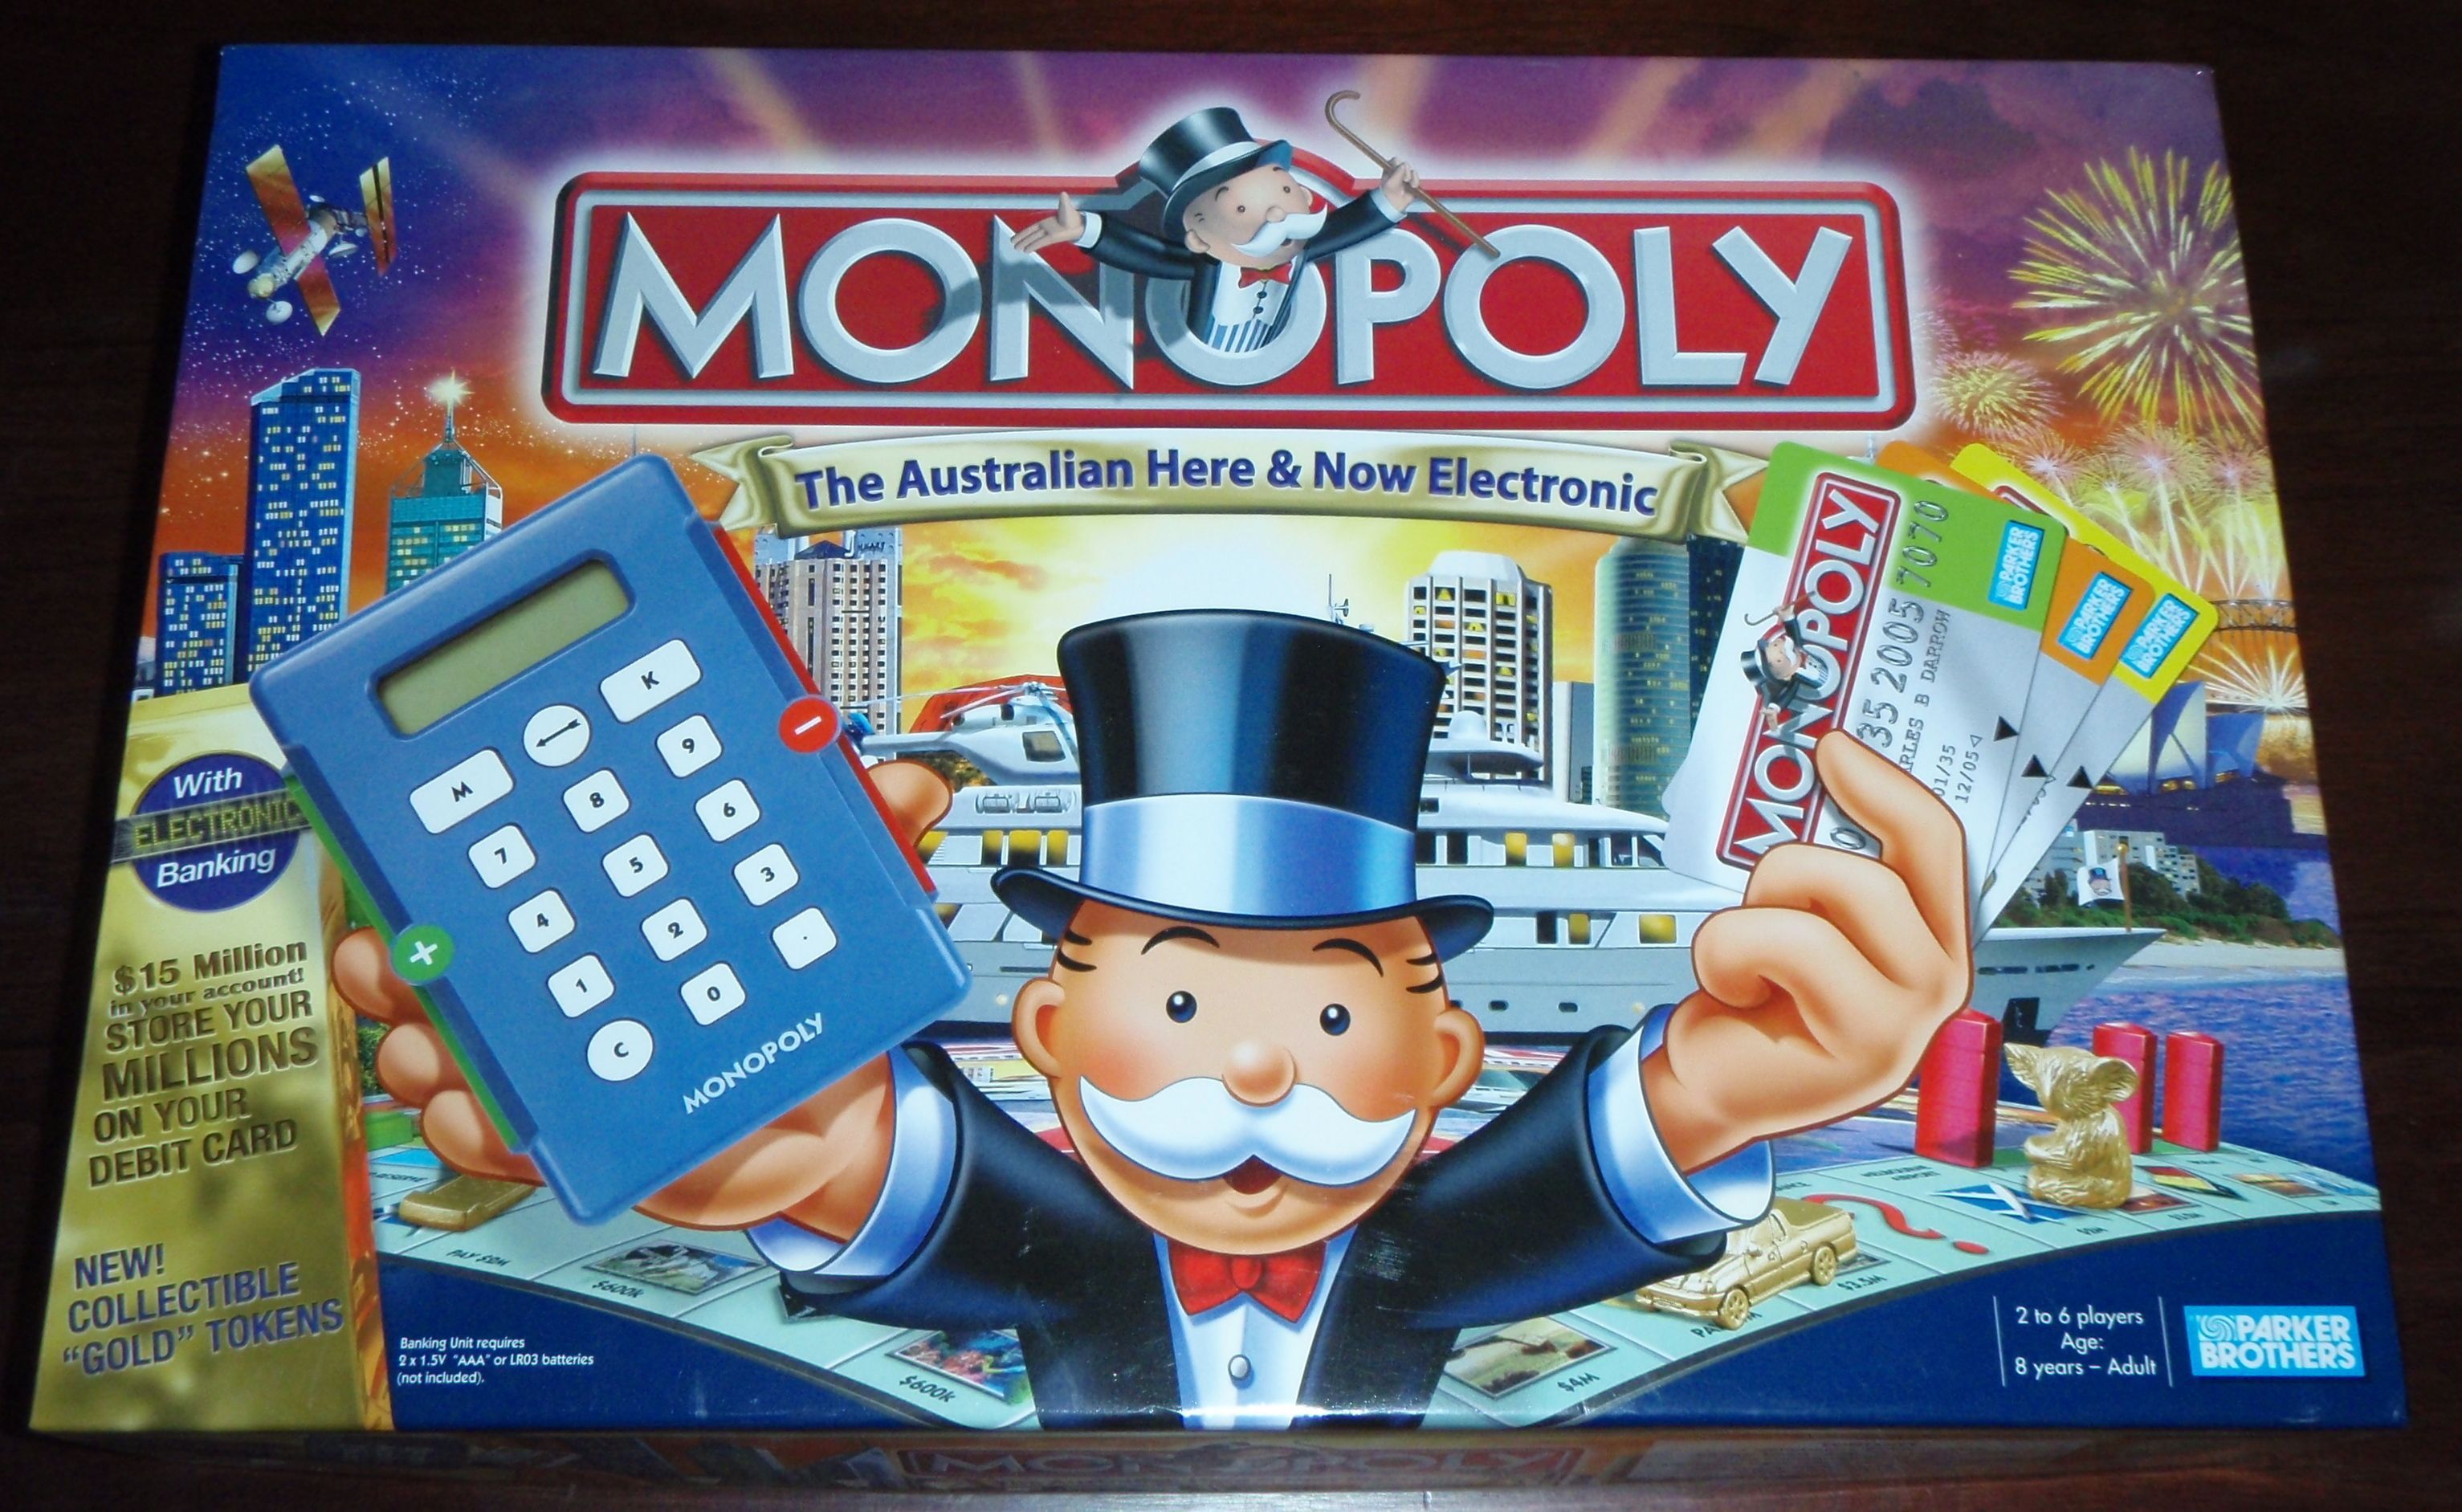 Monopoly: The Australian Here & Now Electronic